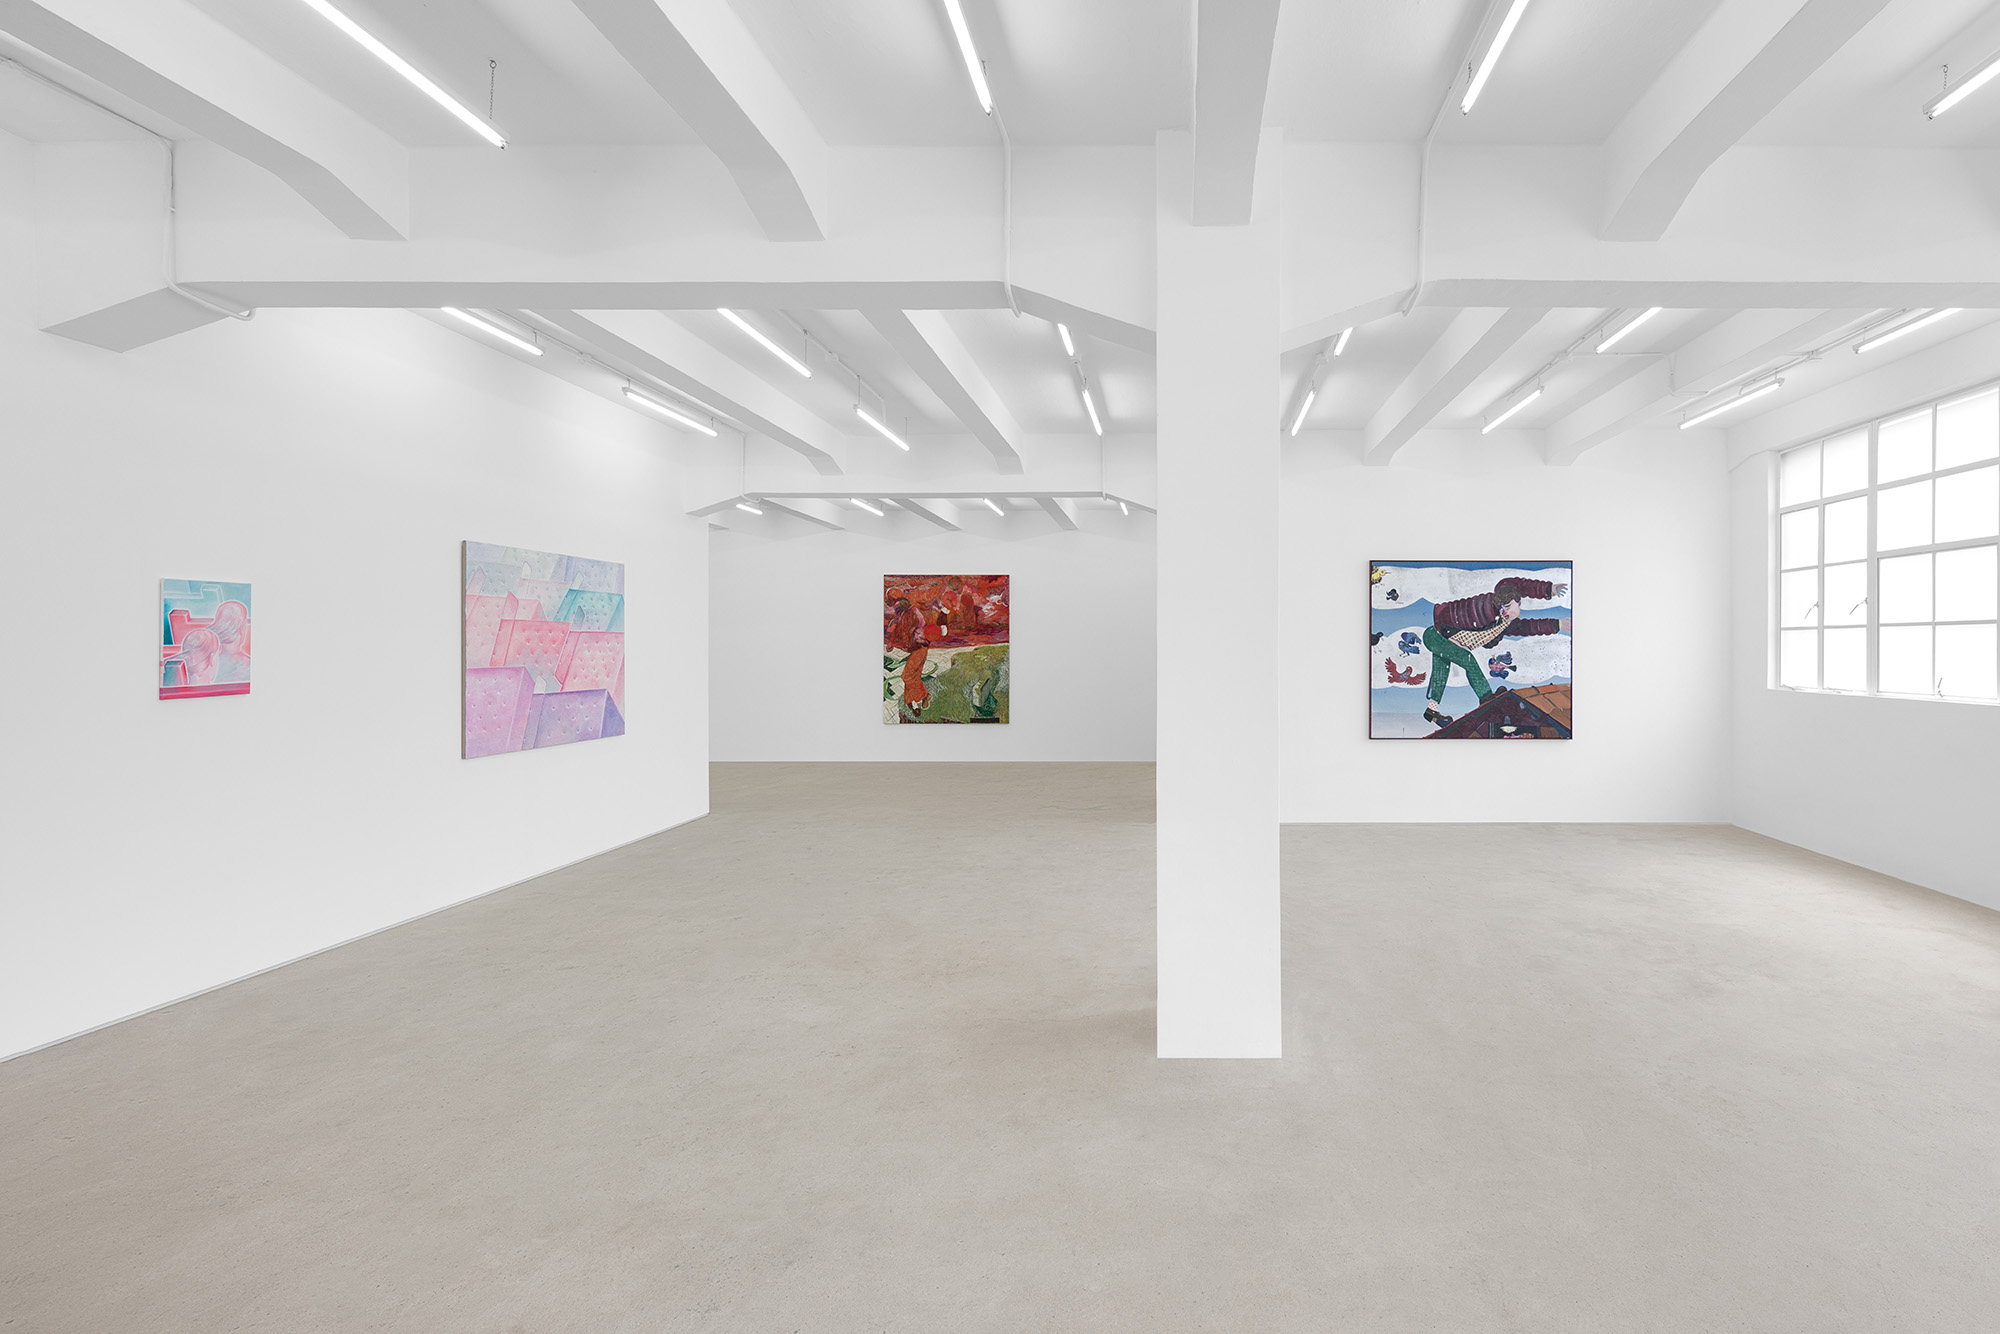 Installation view of group exhibition, Vacation II, at Gallery Vacancy, featuring works by Henry Curchod, Pieter Jennes, and Richard Burton.